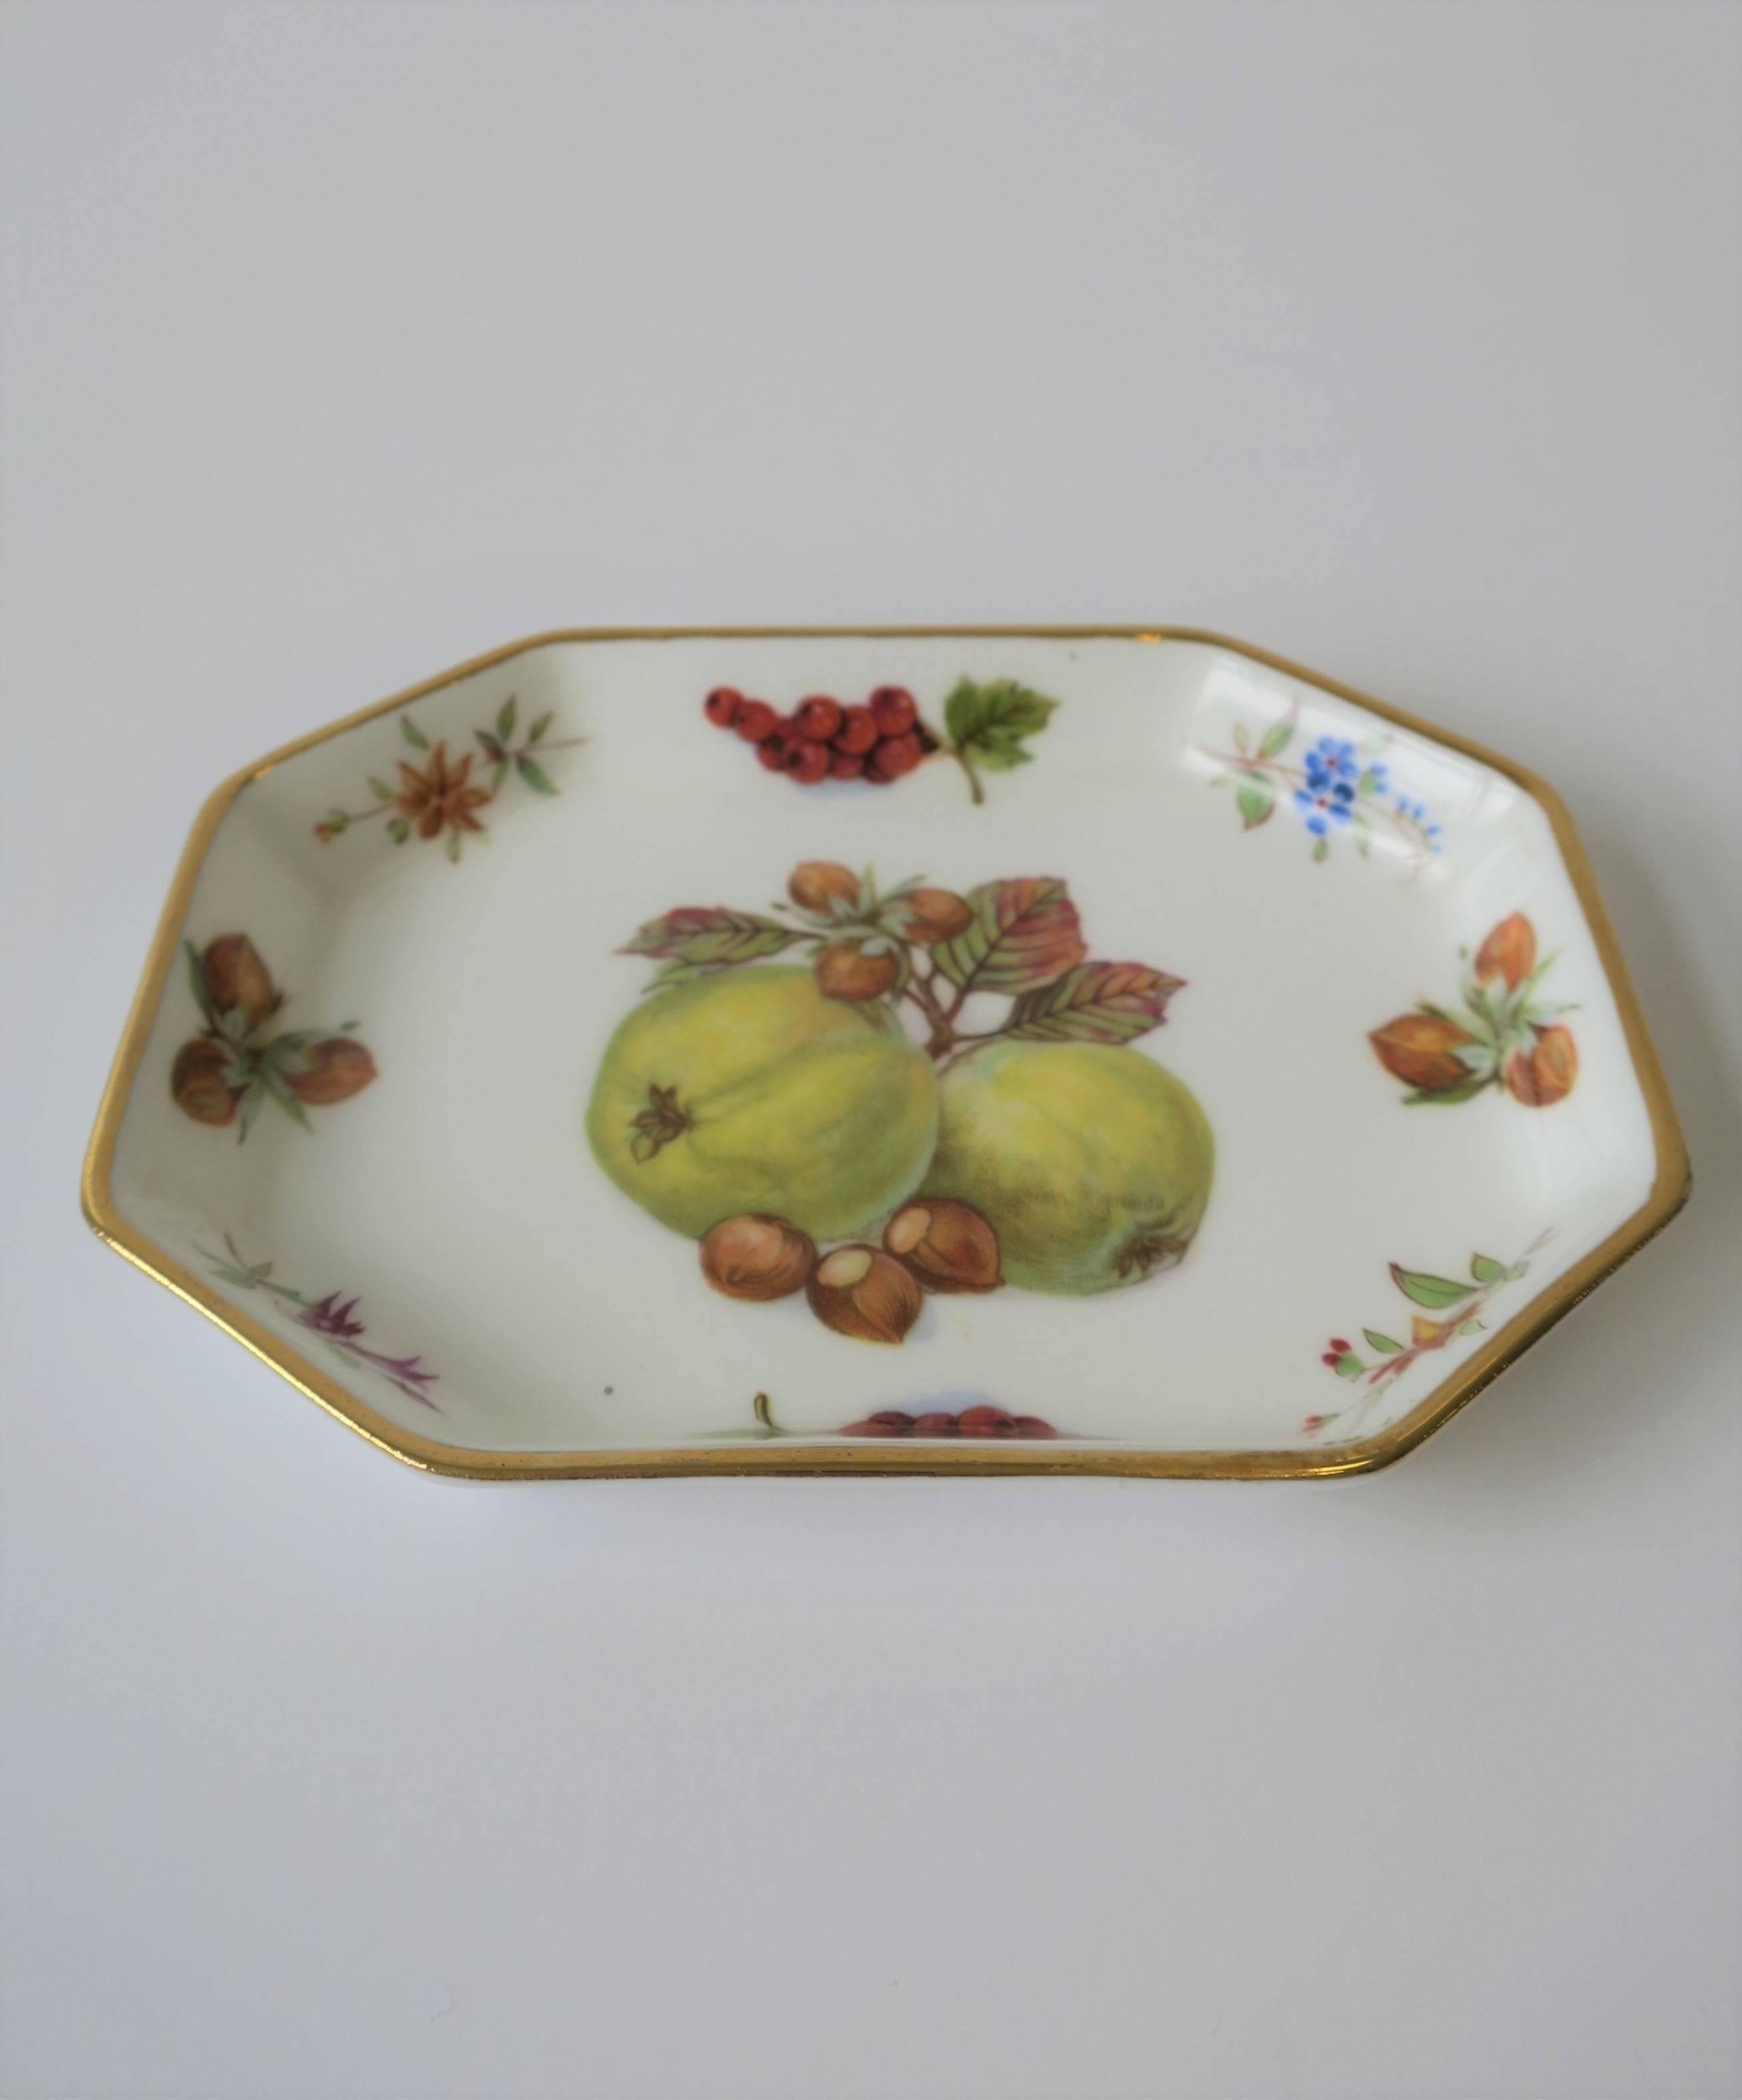 English Porcelain Jewelry Dish with Fruit Design by Hammersley For Sale 1